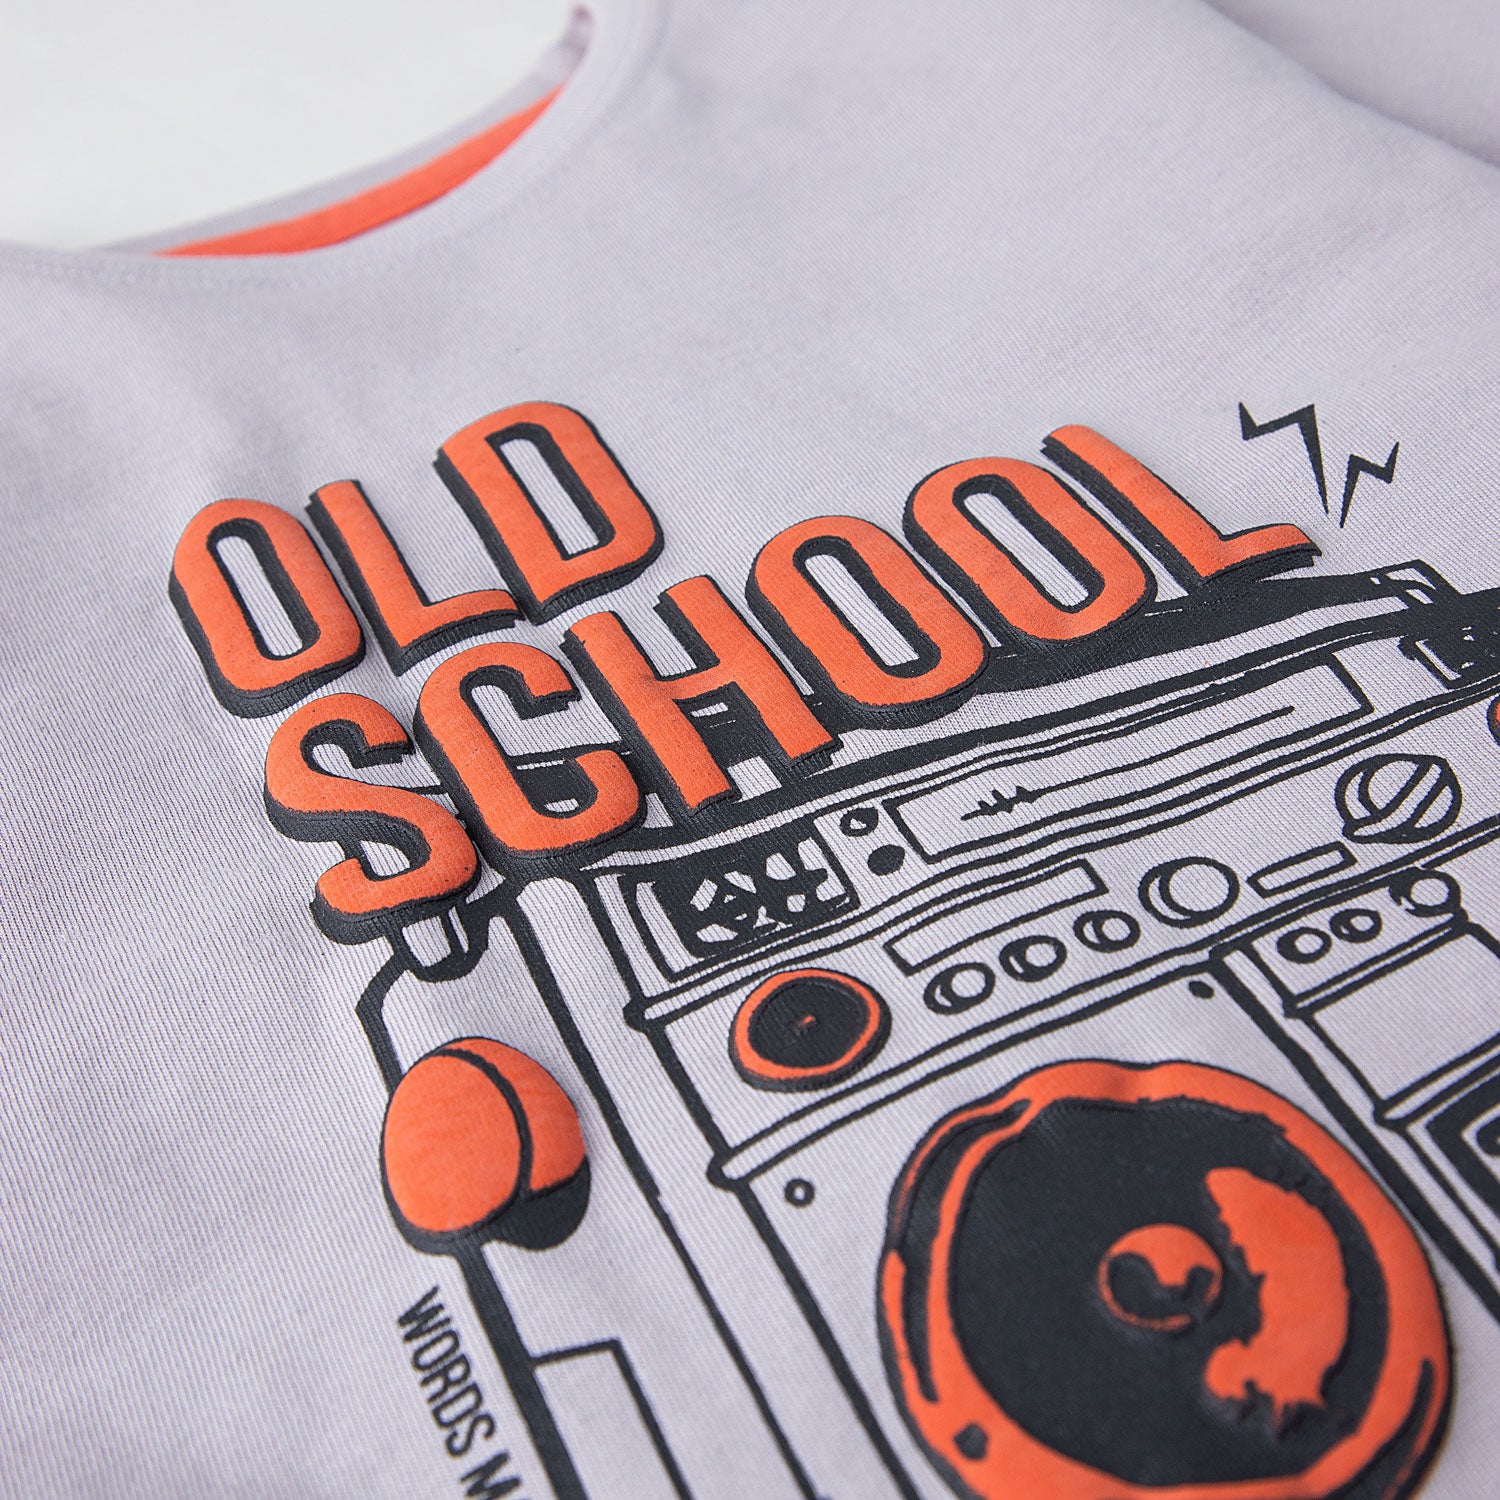 Old School Graphic T-shirt